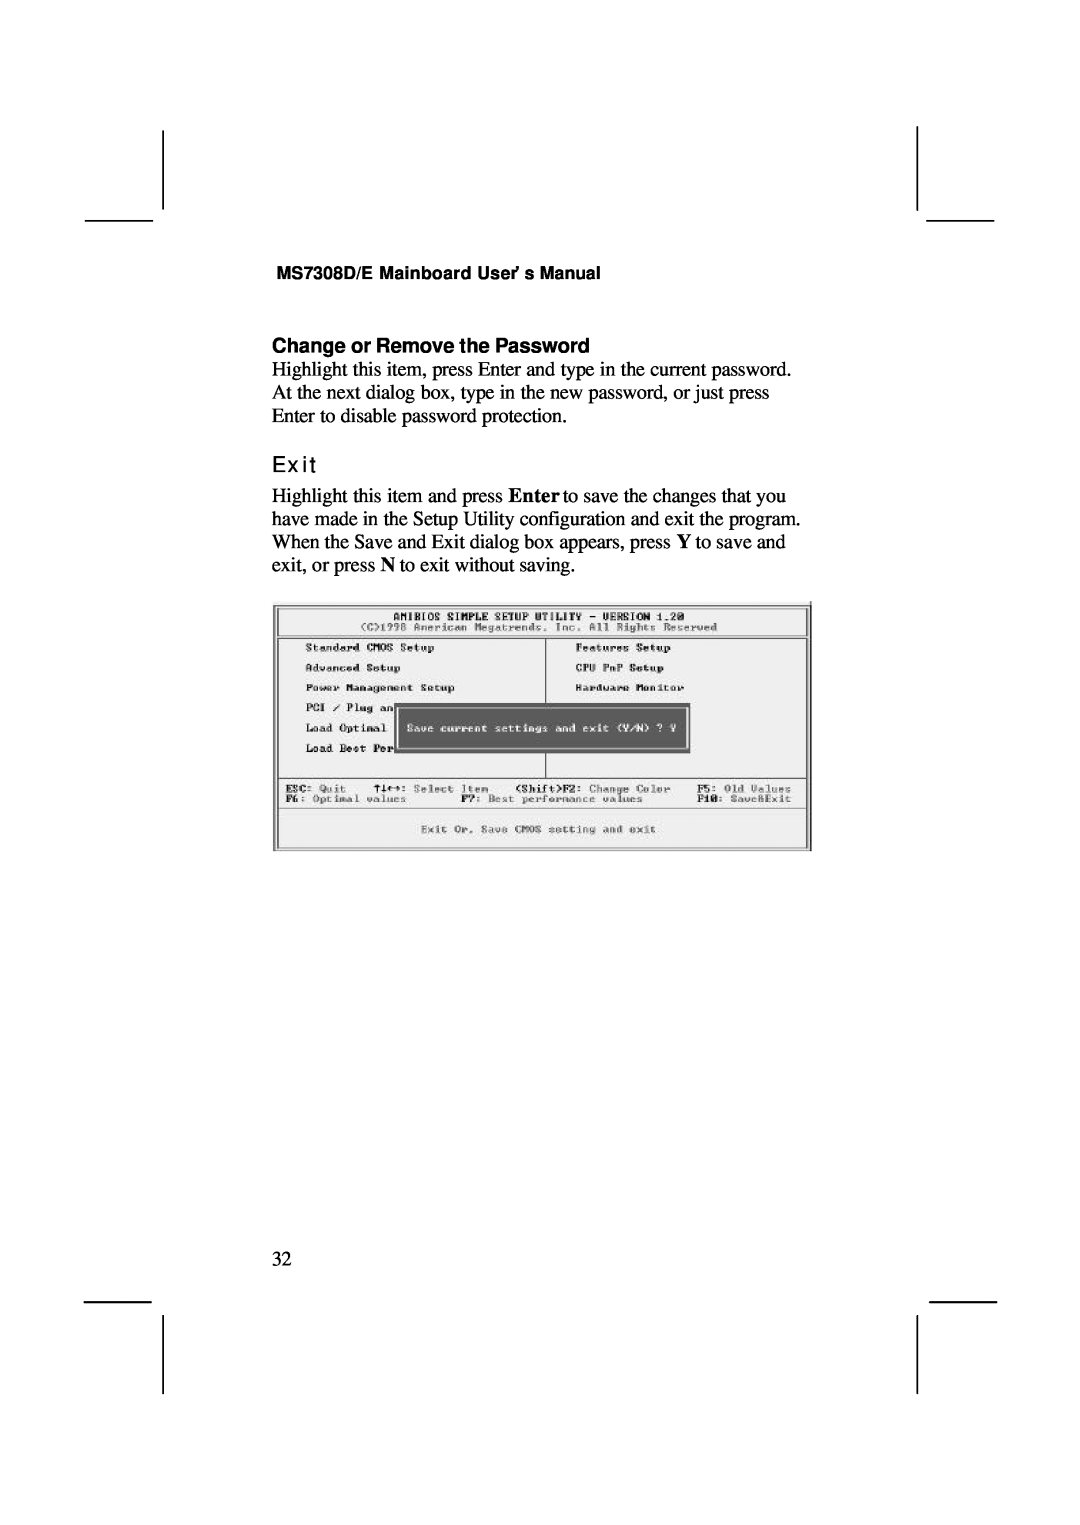 IBM V1.6 S63X/JUNE 2000, MS7308D/E user manual Exit, Change or Remove the Password 